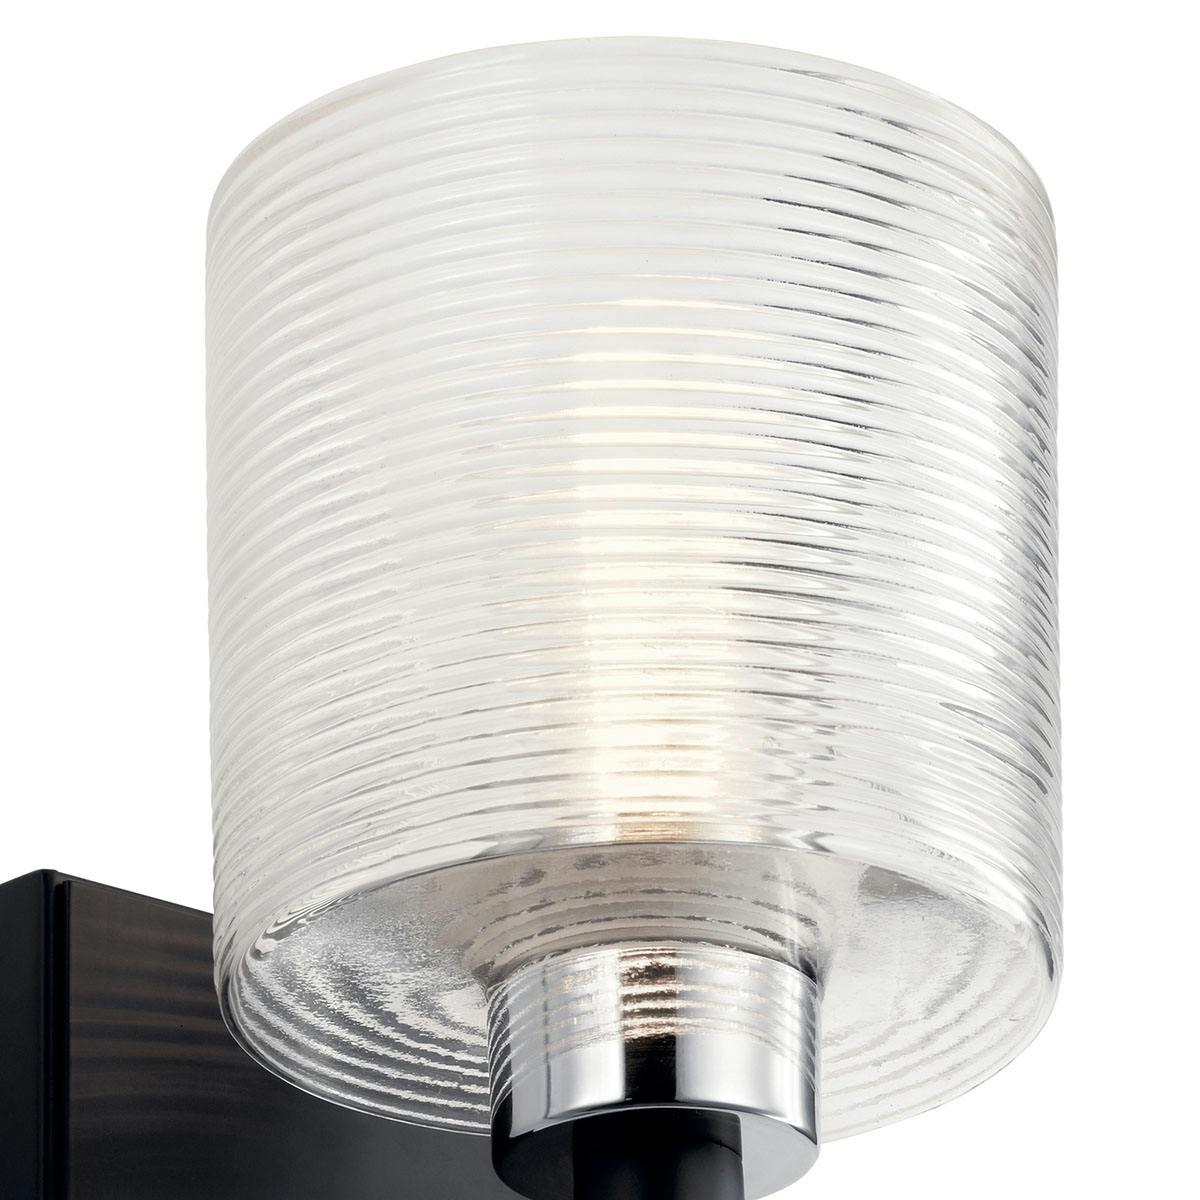 Close up view of the Harvan 9.25" 1 Light Sconce Black on a white background